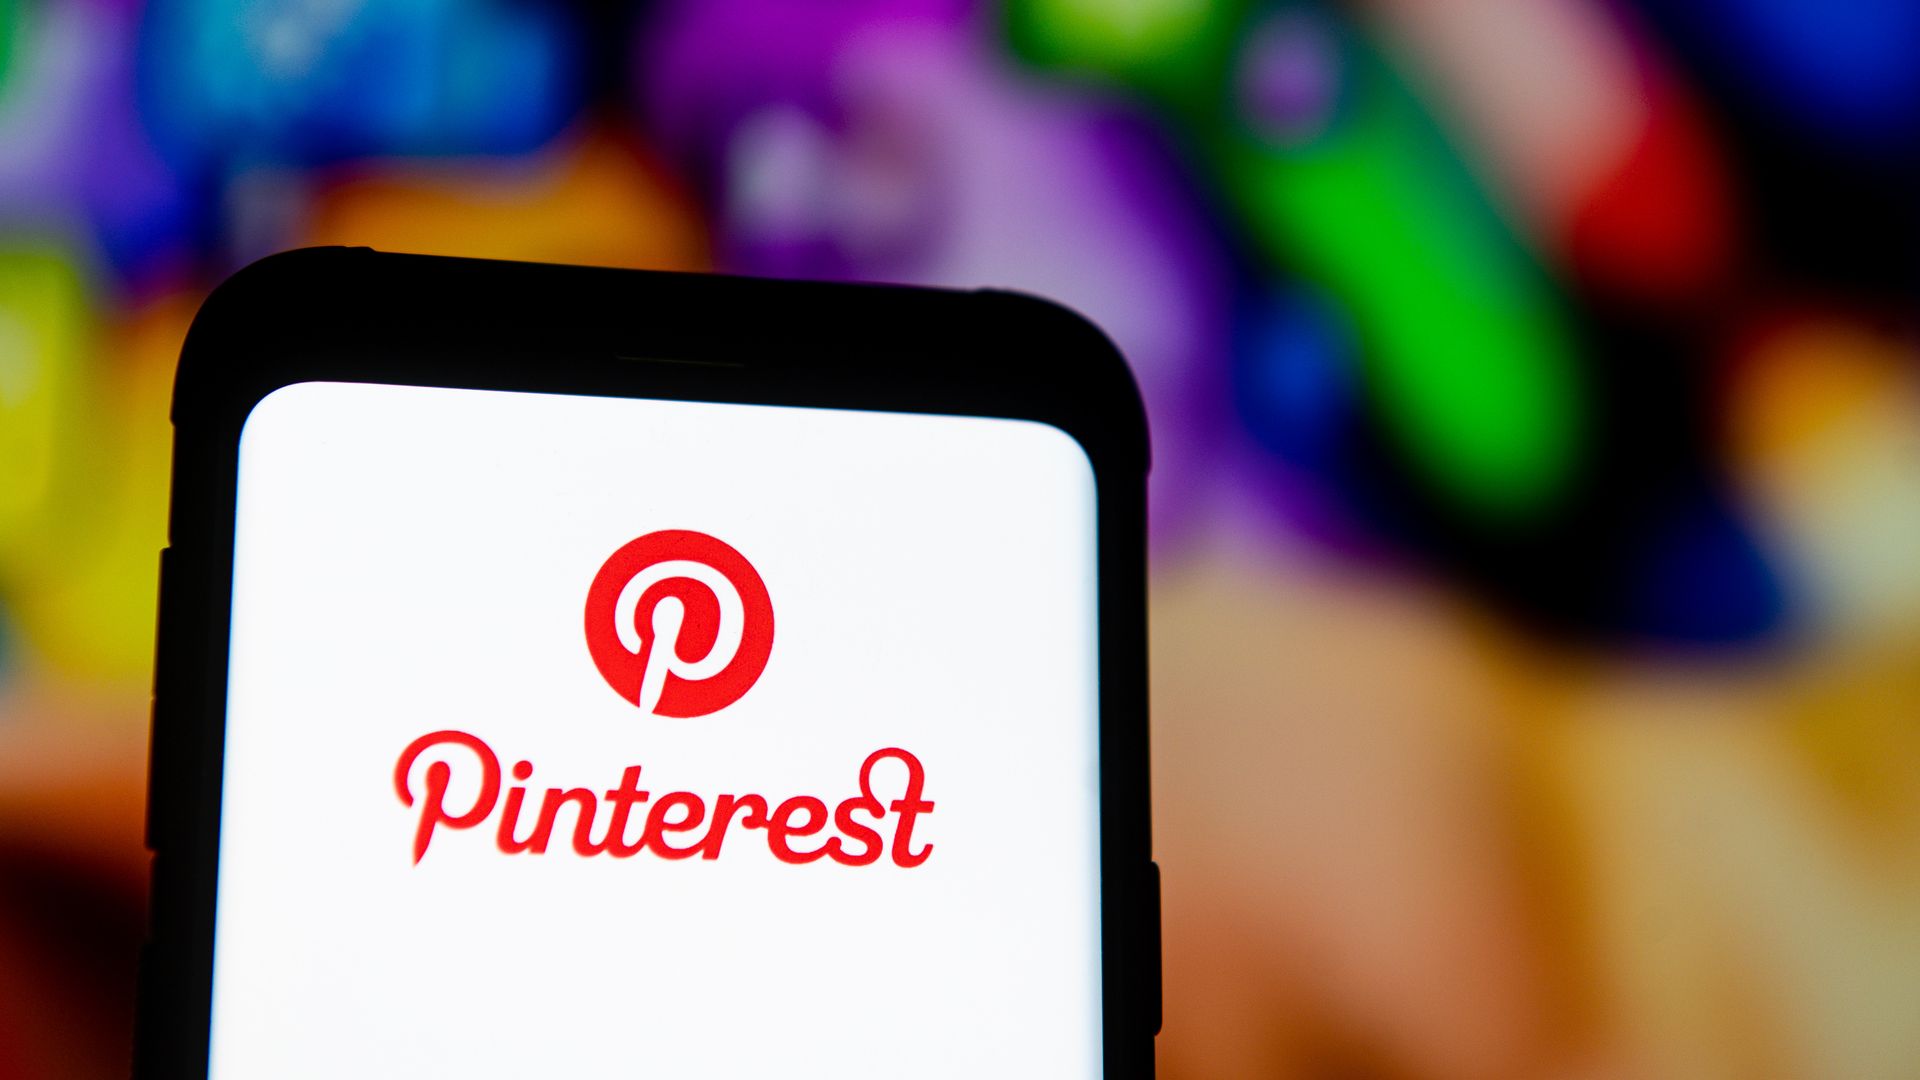 The Pinterest logo is displayed on a smartphone.